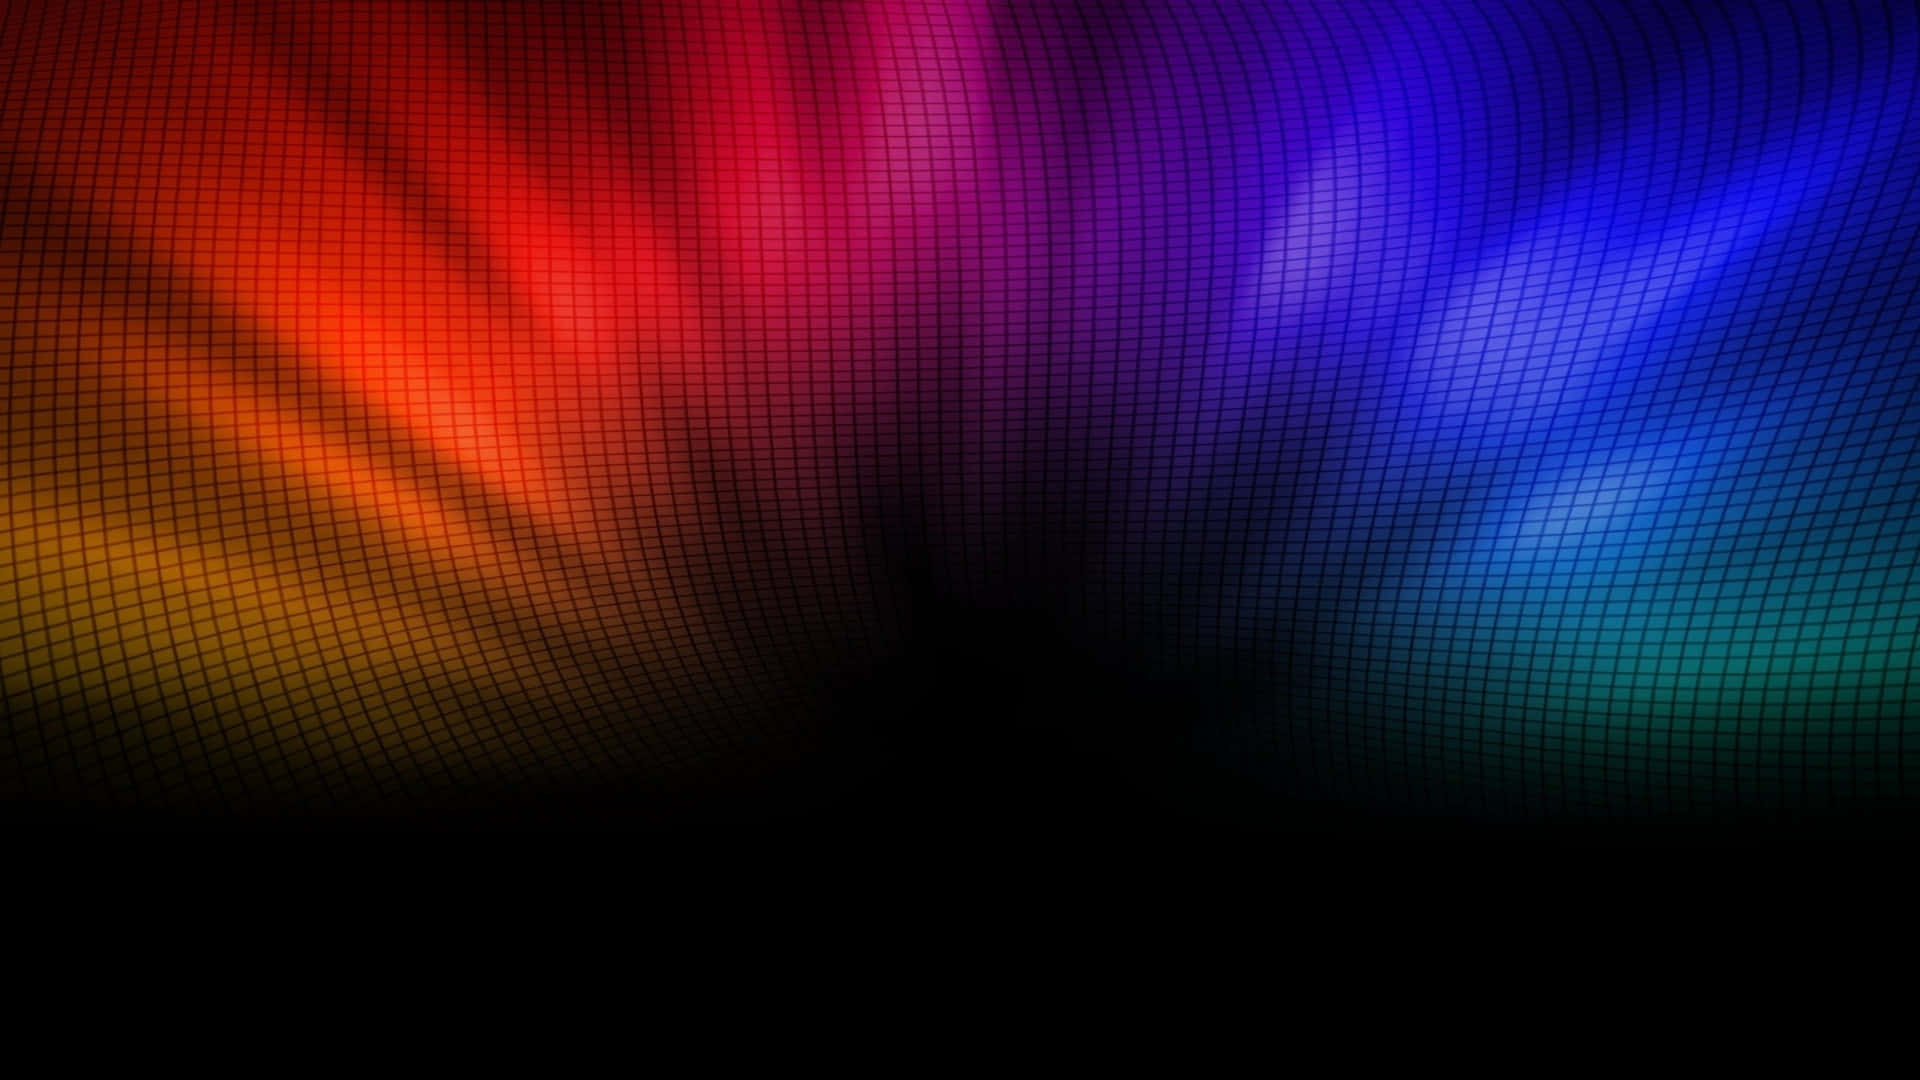 An Explosion of Colours - Vibrant Abstract Wallpaper